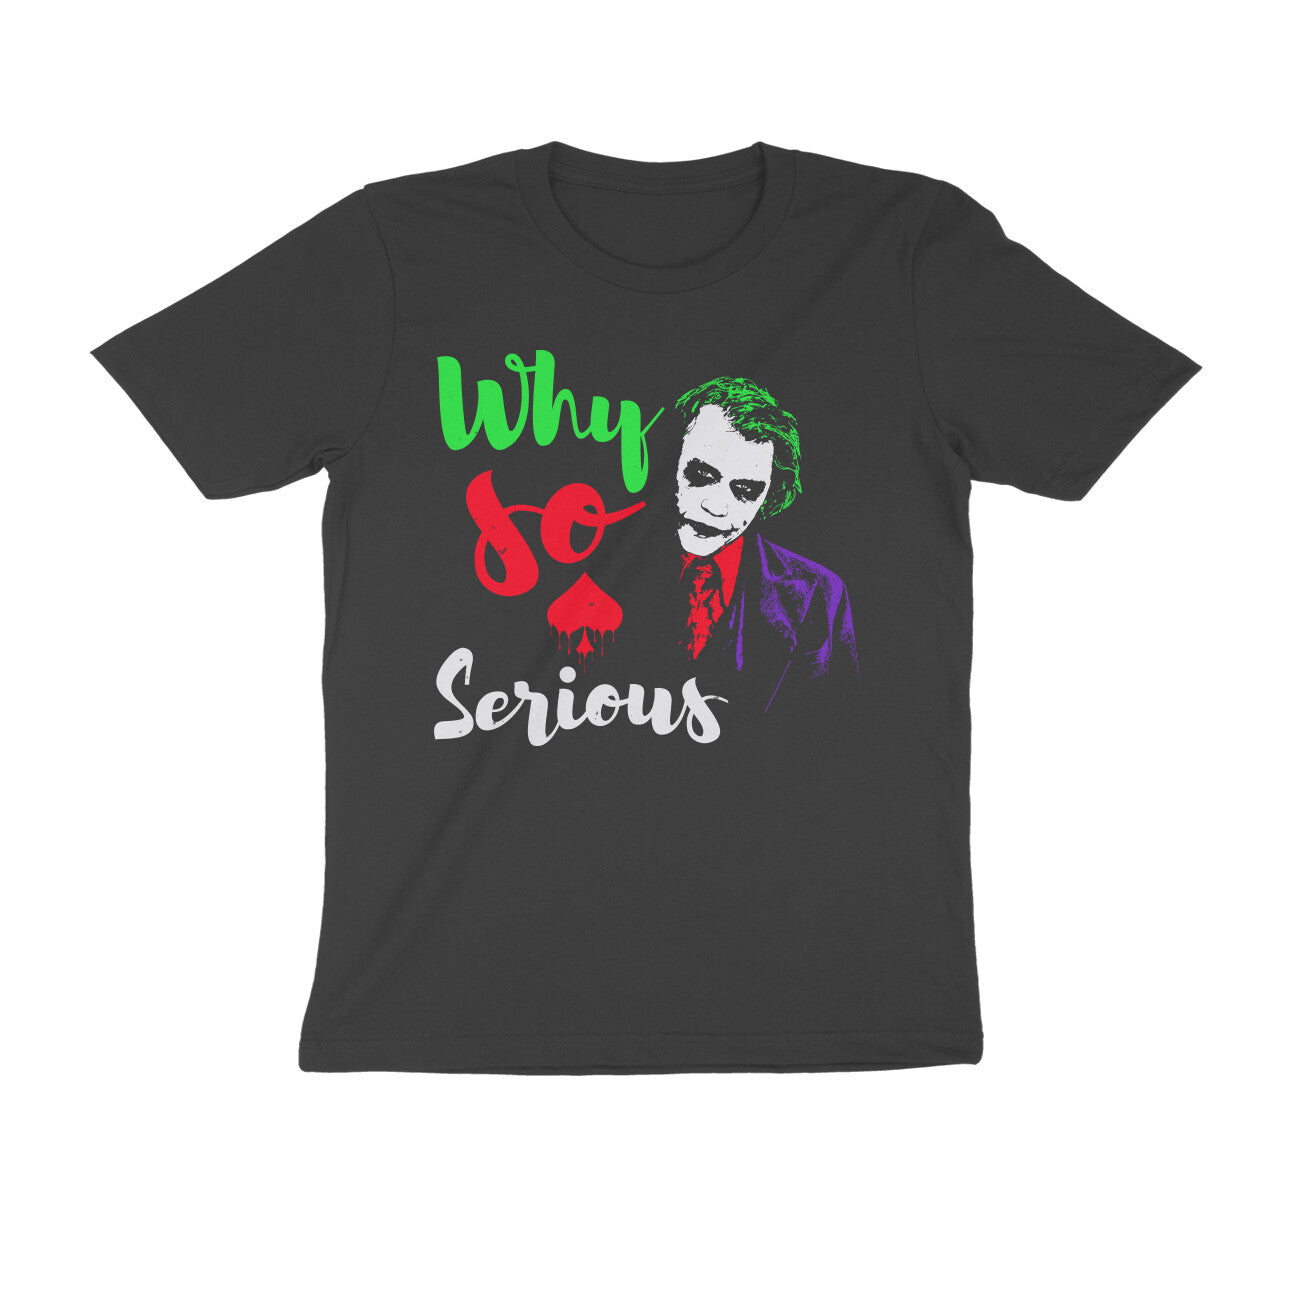 TNH - The Noodle Heads - Why So Serious ? The Joker